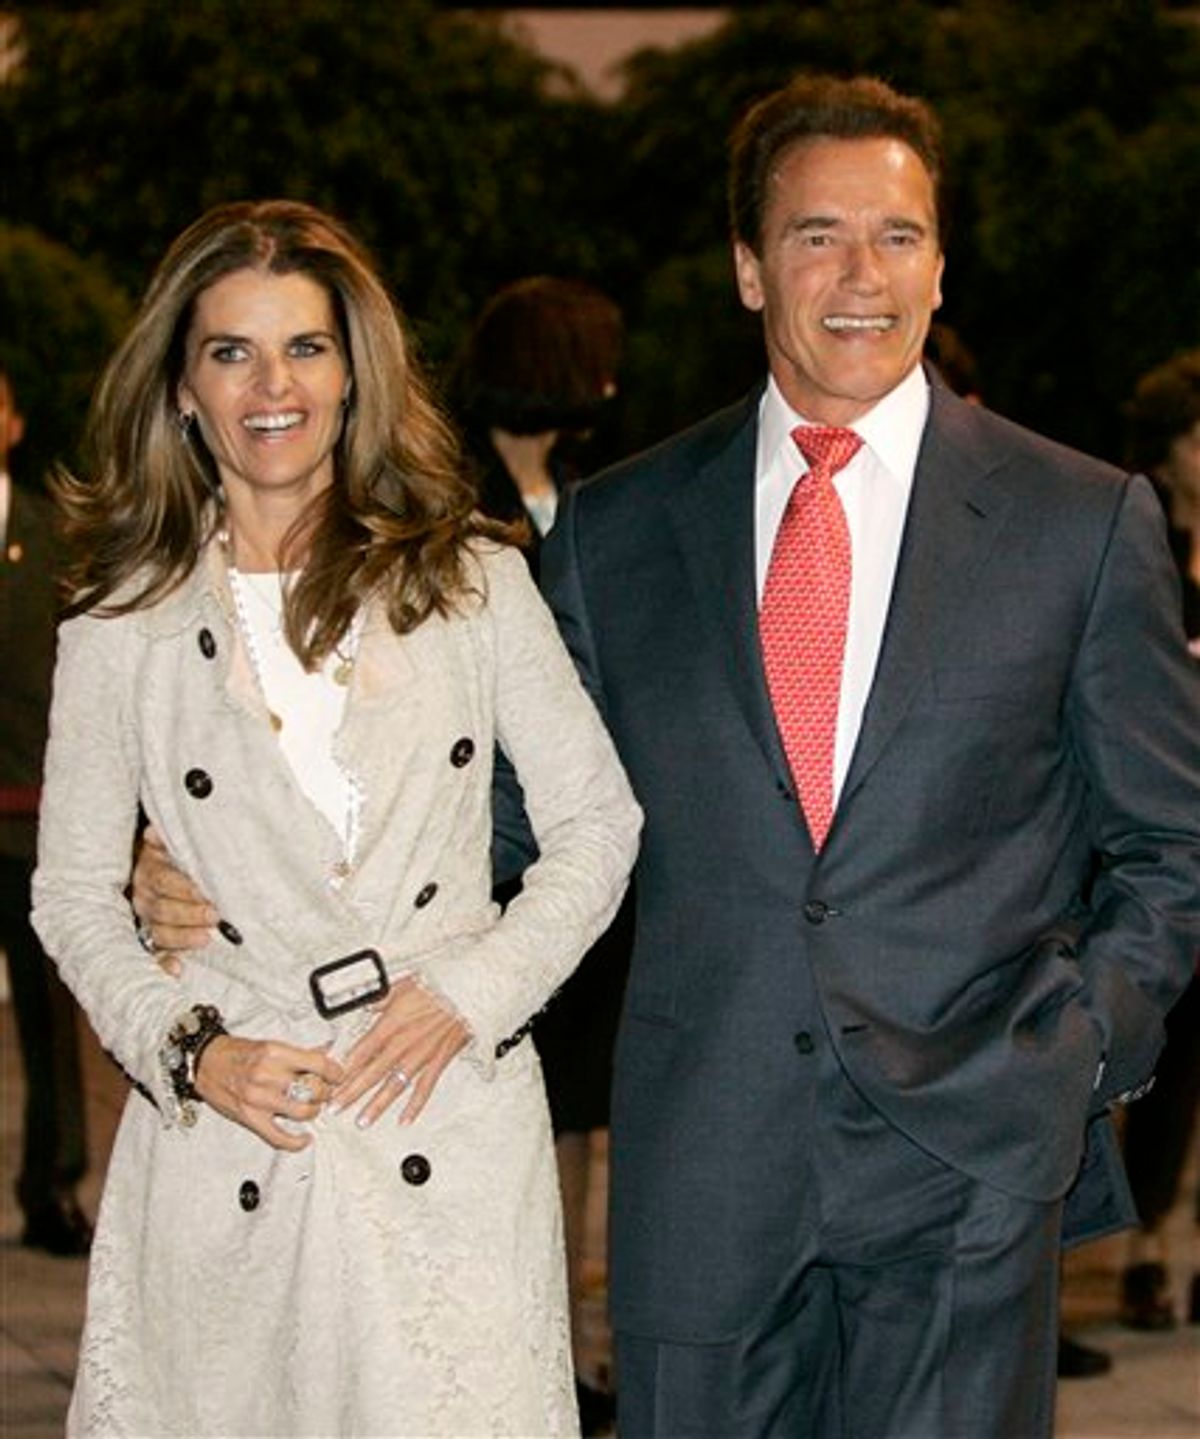 FILE - In this Nov. 8, 2006 file photo, California Gov. Arnold Schwarzenegger arrives in Mexico City, Mexico, with his wife Maria Shriver. Maria Shriver has filed for divorce from Arnold Schwarzenegger in Los Angeles Superior Court, Friday, July 1, 2011.   (AP Photo/Marcio Jose Sanchez, file) (AP)